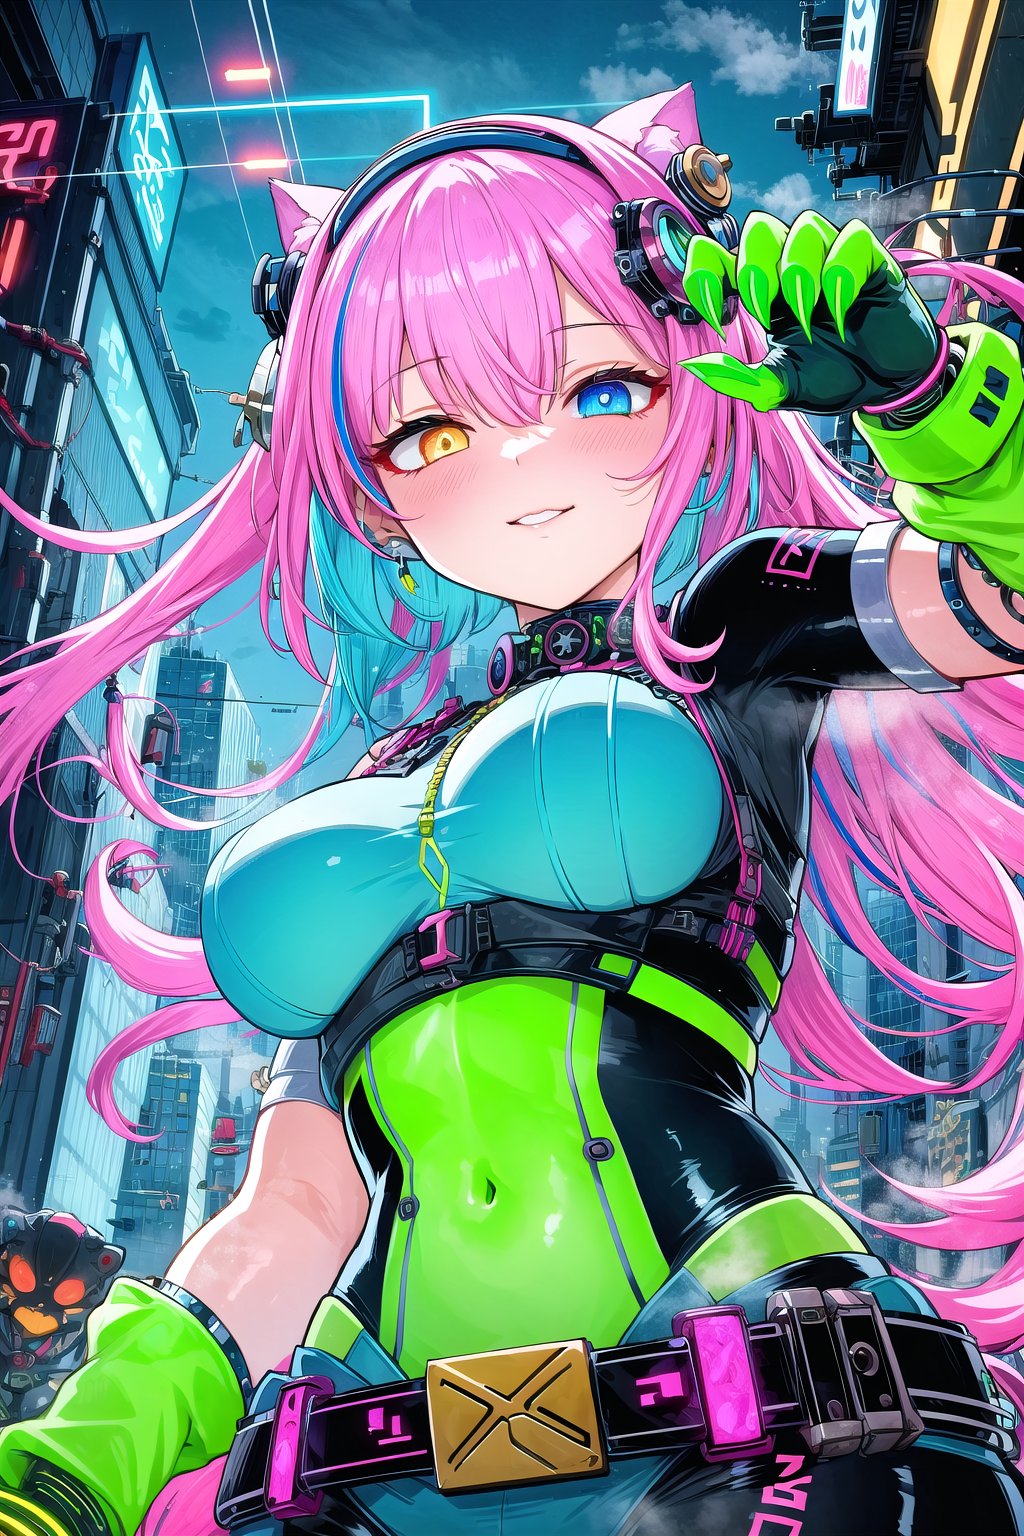 (Masterpiece), (highres), 8k, hyperdetailed, deep depth of field, motion blur, hirom1tsu, official alterate hairstyle, uique character concept, hair between eyes, hyperrealistc, hypnotizing green eyes, toxic, heterochromia, persona, devious, runge, punk girl, sassy, villain, claws, from below, mature female, bodysuit, blue and pink hair, goggles, steampunk, rajah hair, belt, perfect female figure, gorgeous, streaked hair, cityscape, street, neon sign, glowing lines, neon trim, bloom, shadow, dynamic line of action, fighting stance, cybernetic woman, nature, overgrown, augmentation, cable, mechanical parts, steam, dynamic posture, (working), wire, futuristic, sci-fi, metallic skin, chrome, cube, glowing, sci-fi, otherworldly, upper body, half-closed eyes, serene, alien architecture, scenery,sugar_rune,1 girl<lora:EMS-352161-EMS:0.900000>, <lora:EMS-1093-EMS:0.300000>, <lora:EMS-91280-EMS:0.500000>